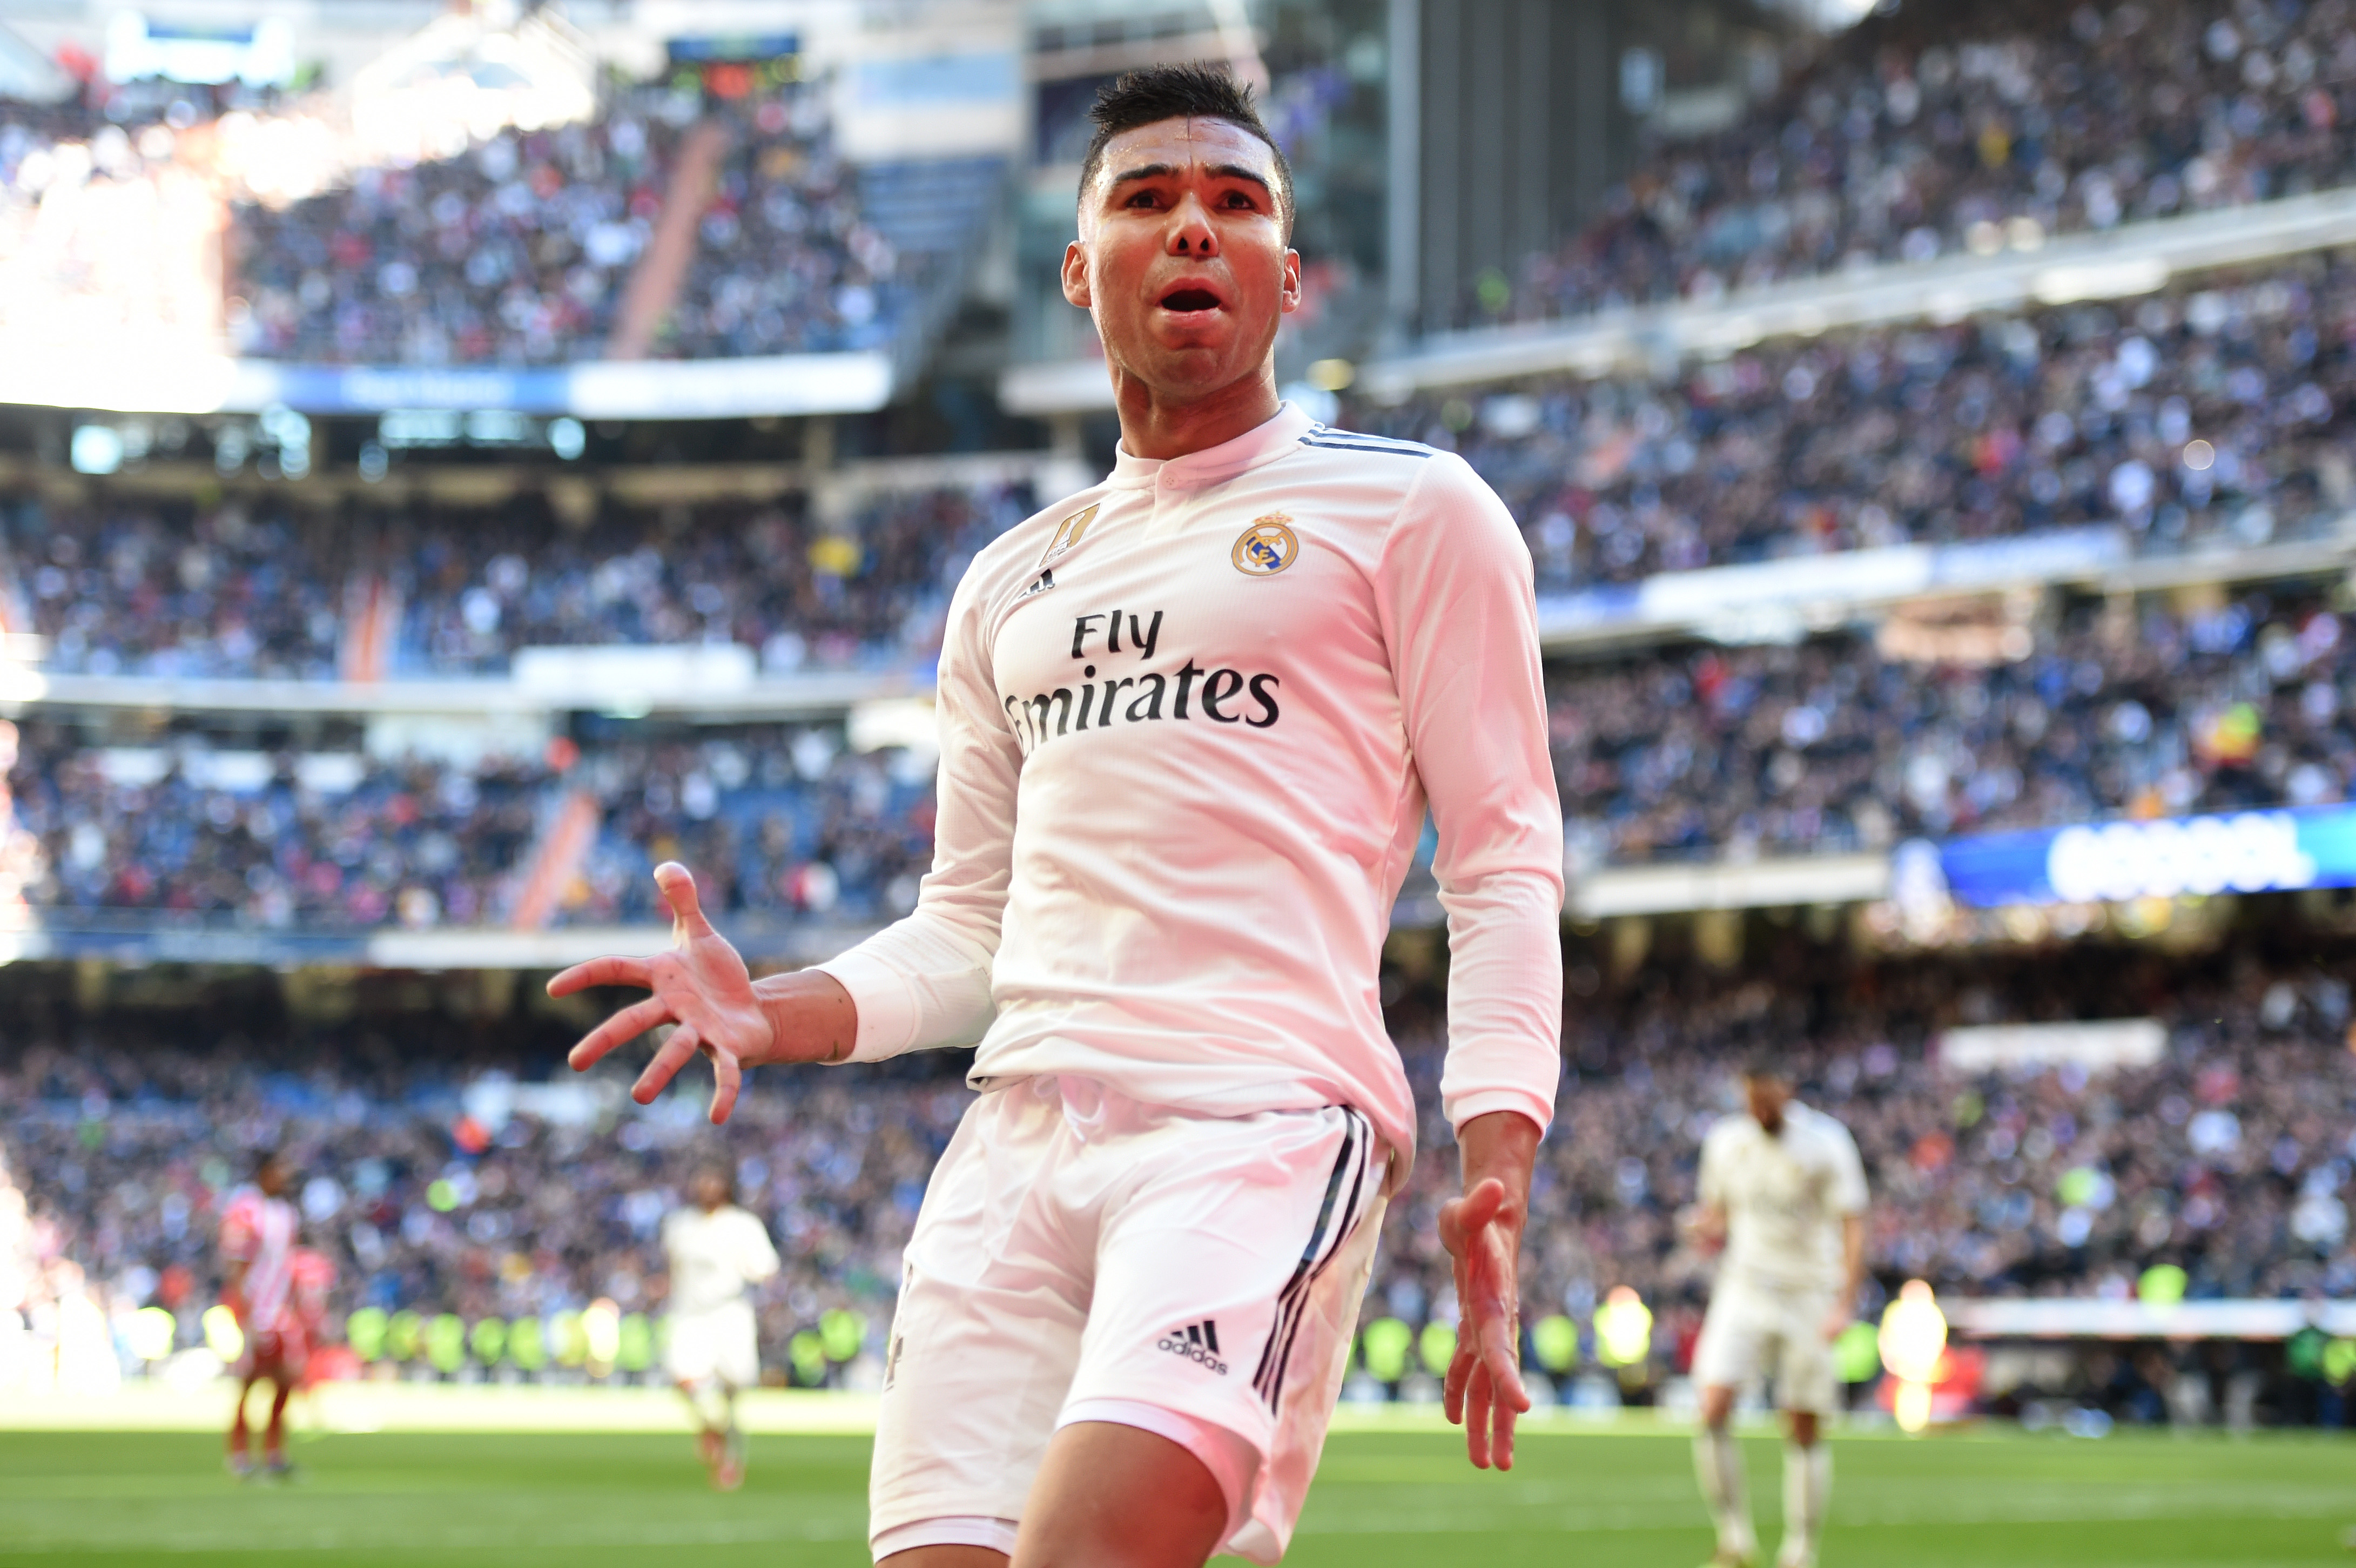 Casemiro to stay put at Real Madrid. (Photo by Denis Doyle/Getty Images)